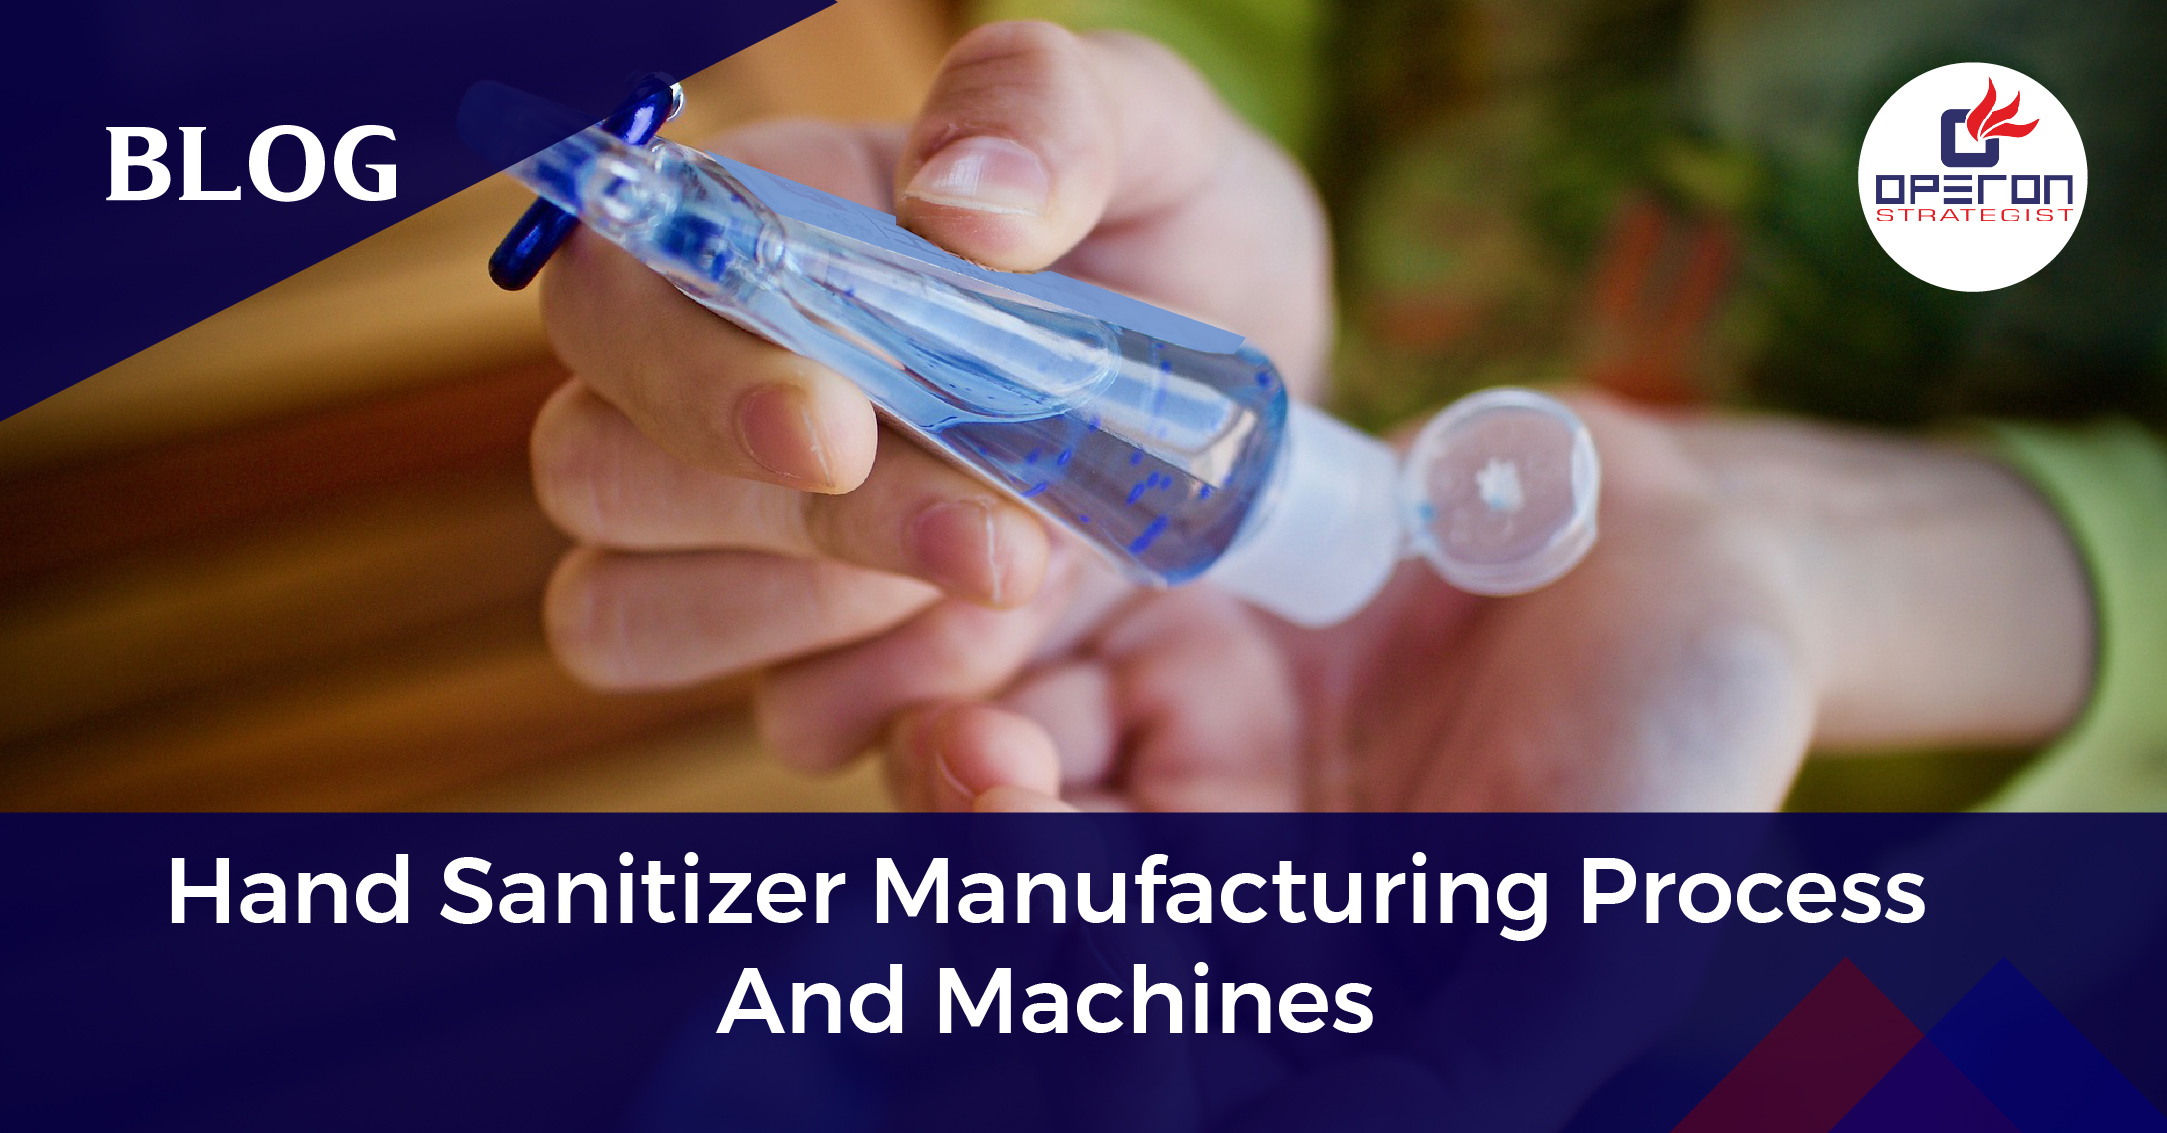 Hand Sanitizer Manufacturing Process And Machines 01